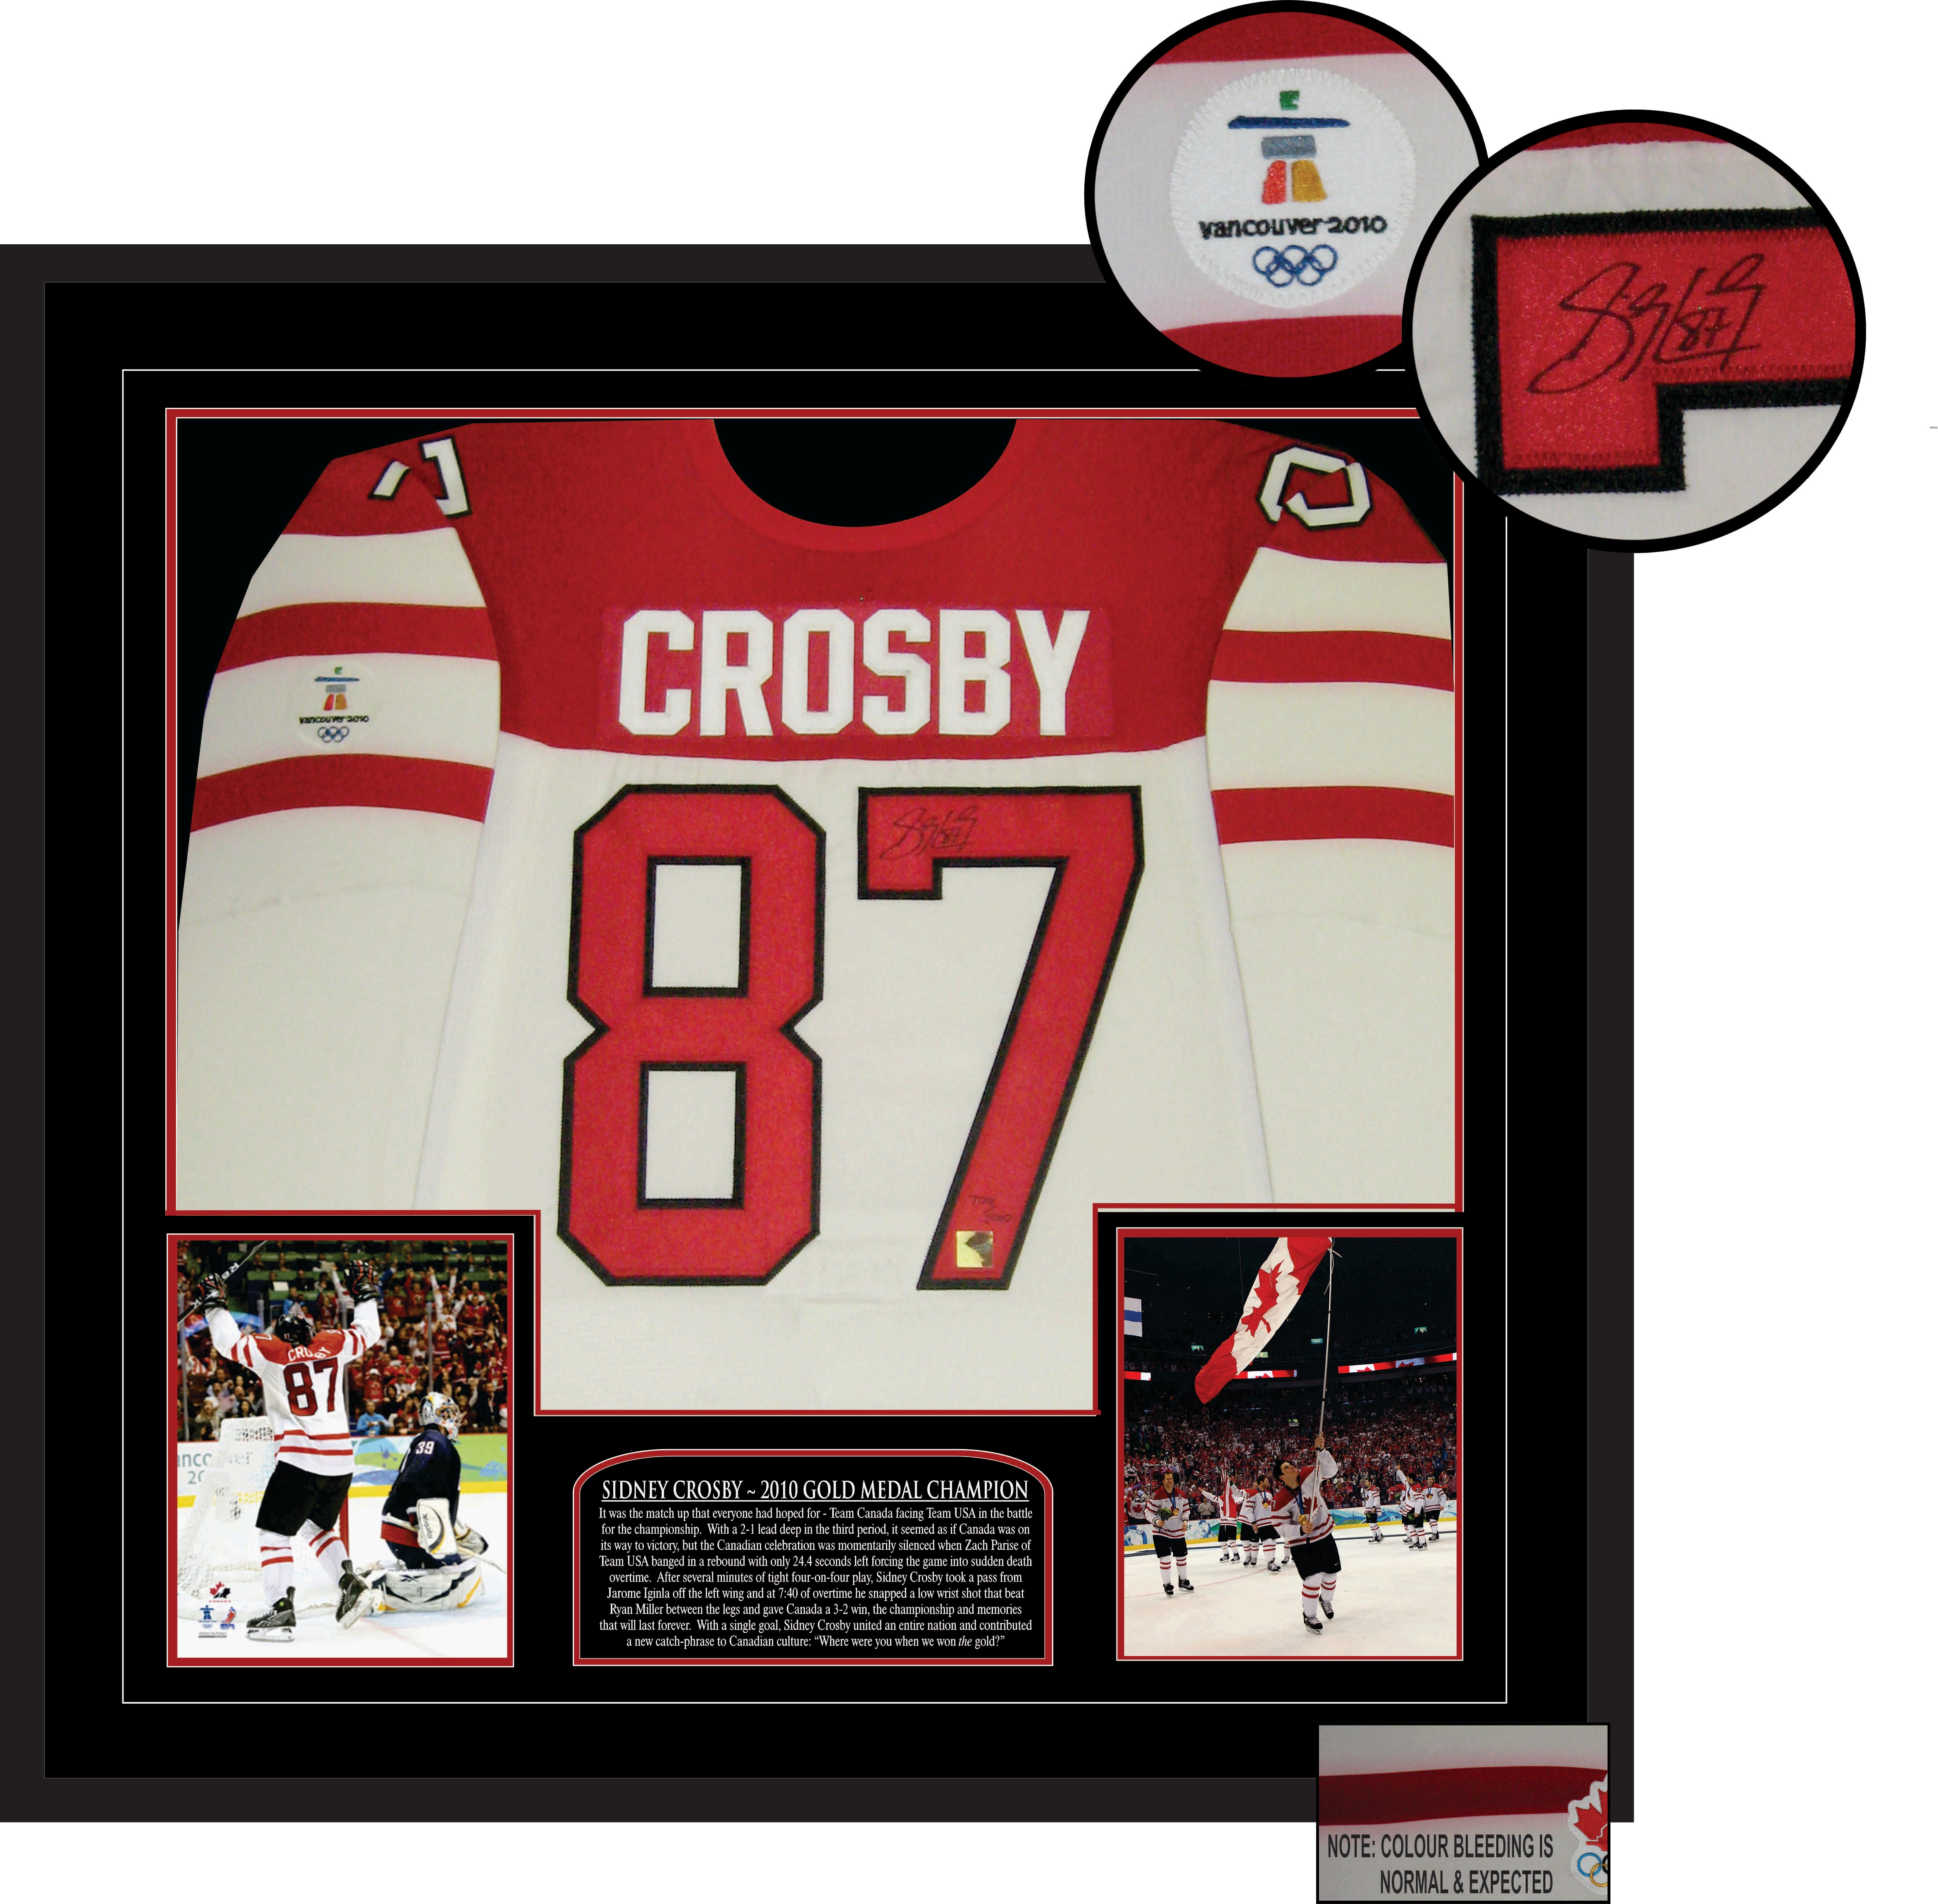 sidney crosby canadian olympic jersey